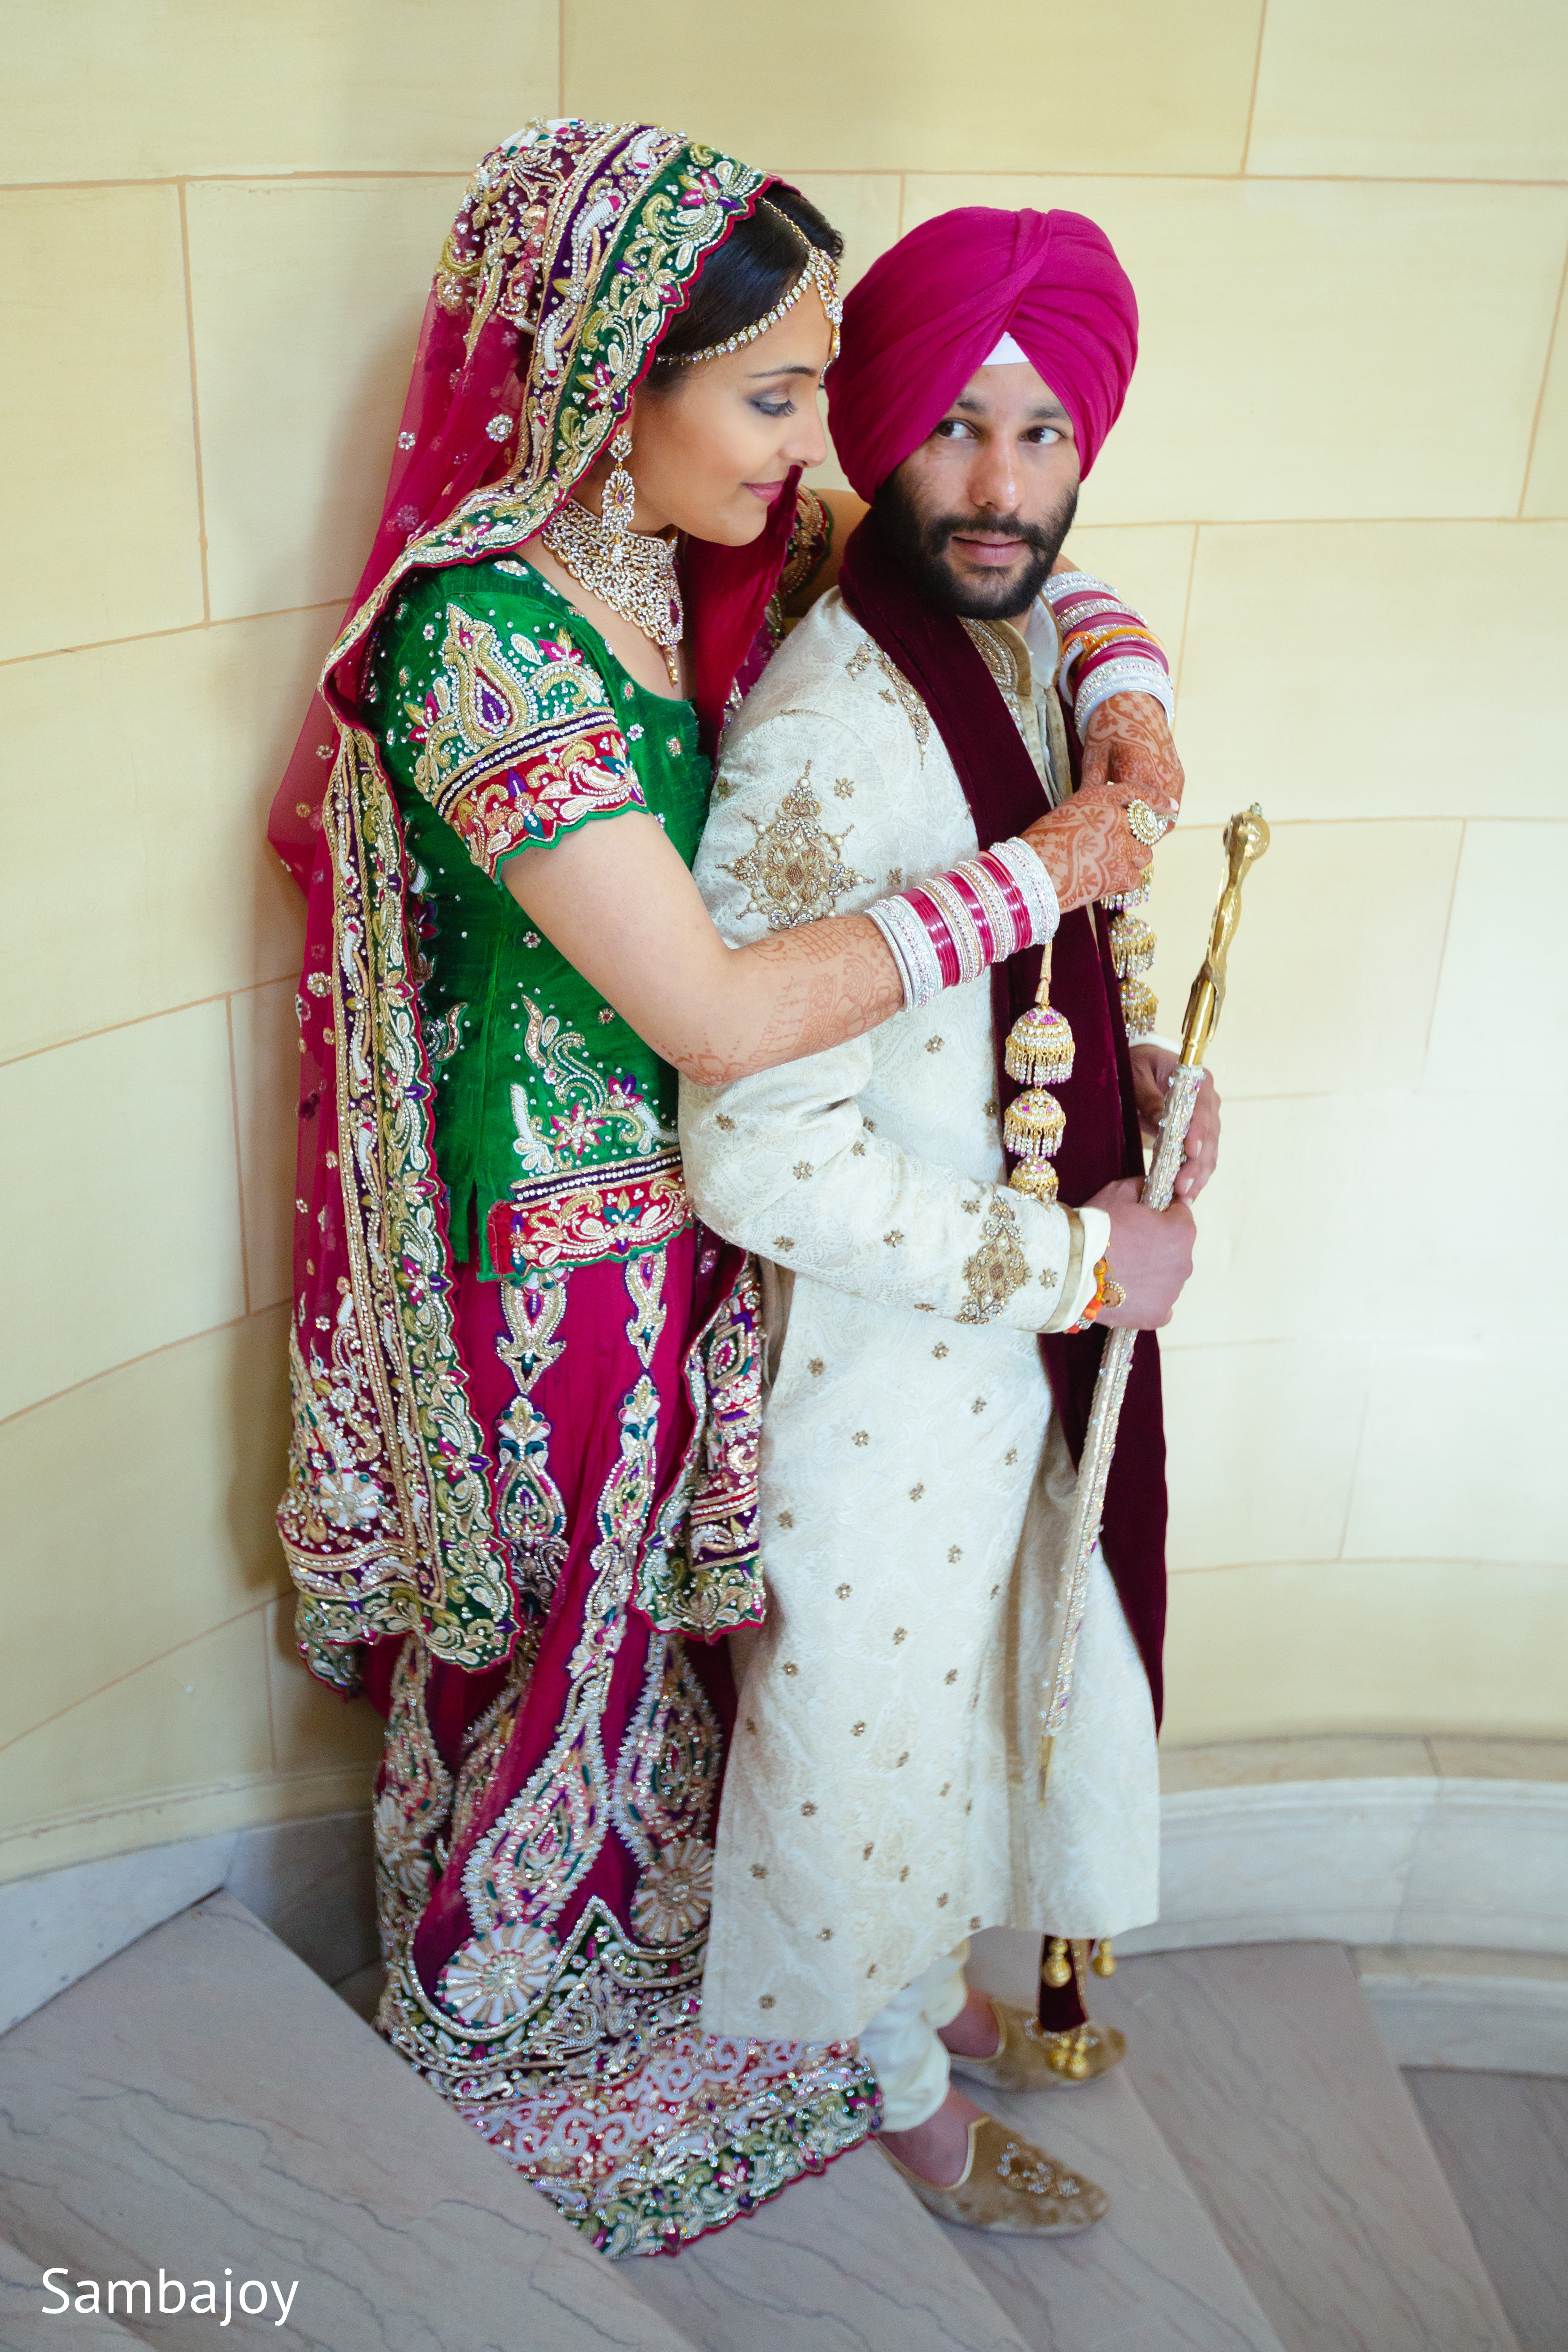 Are Pakistani weddings just for Instagram now? - Culture - Images